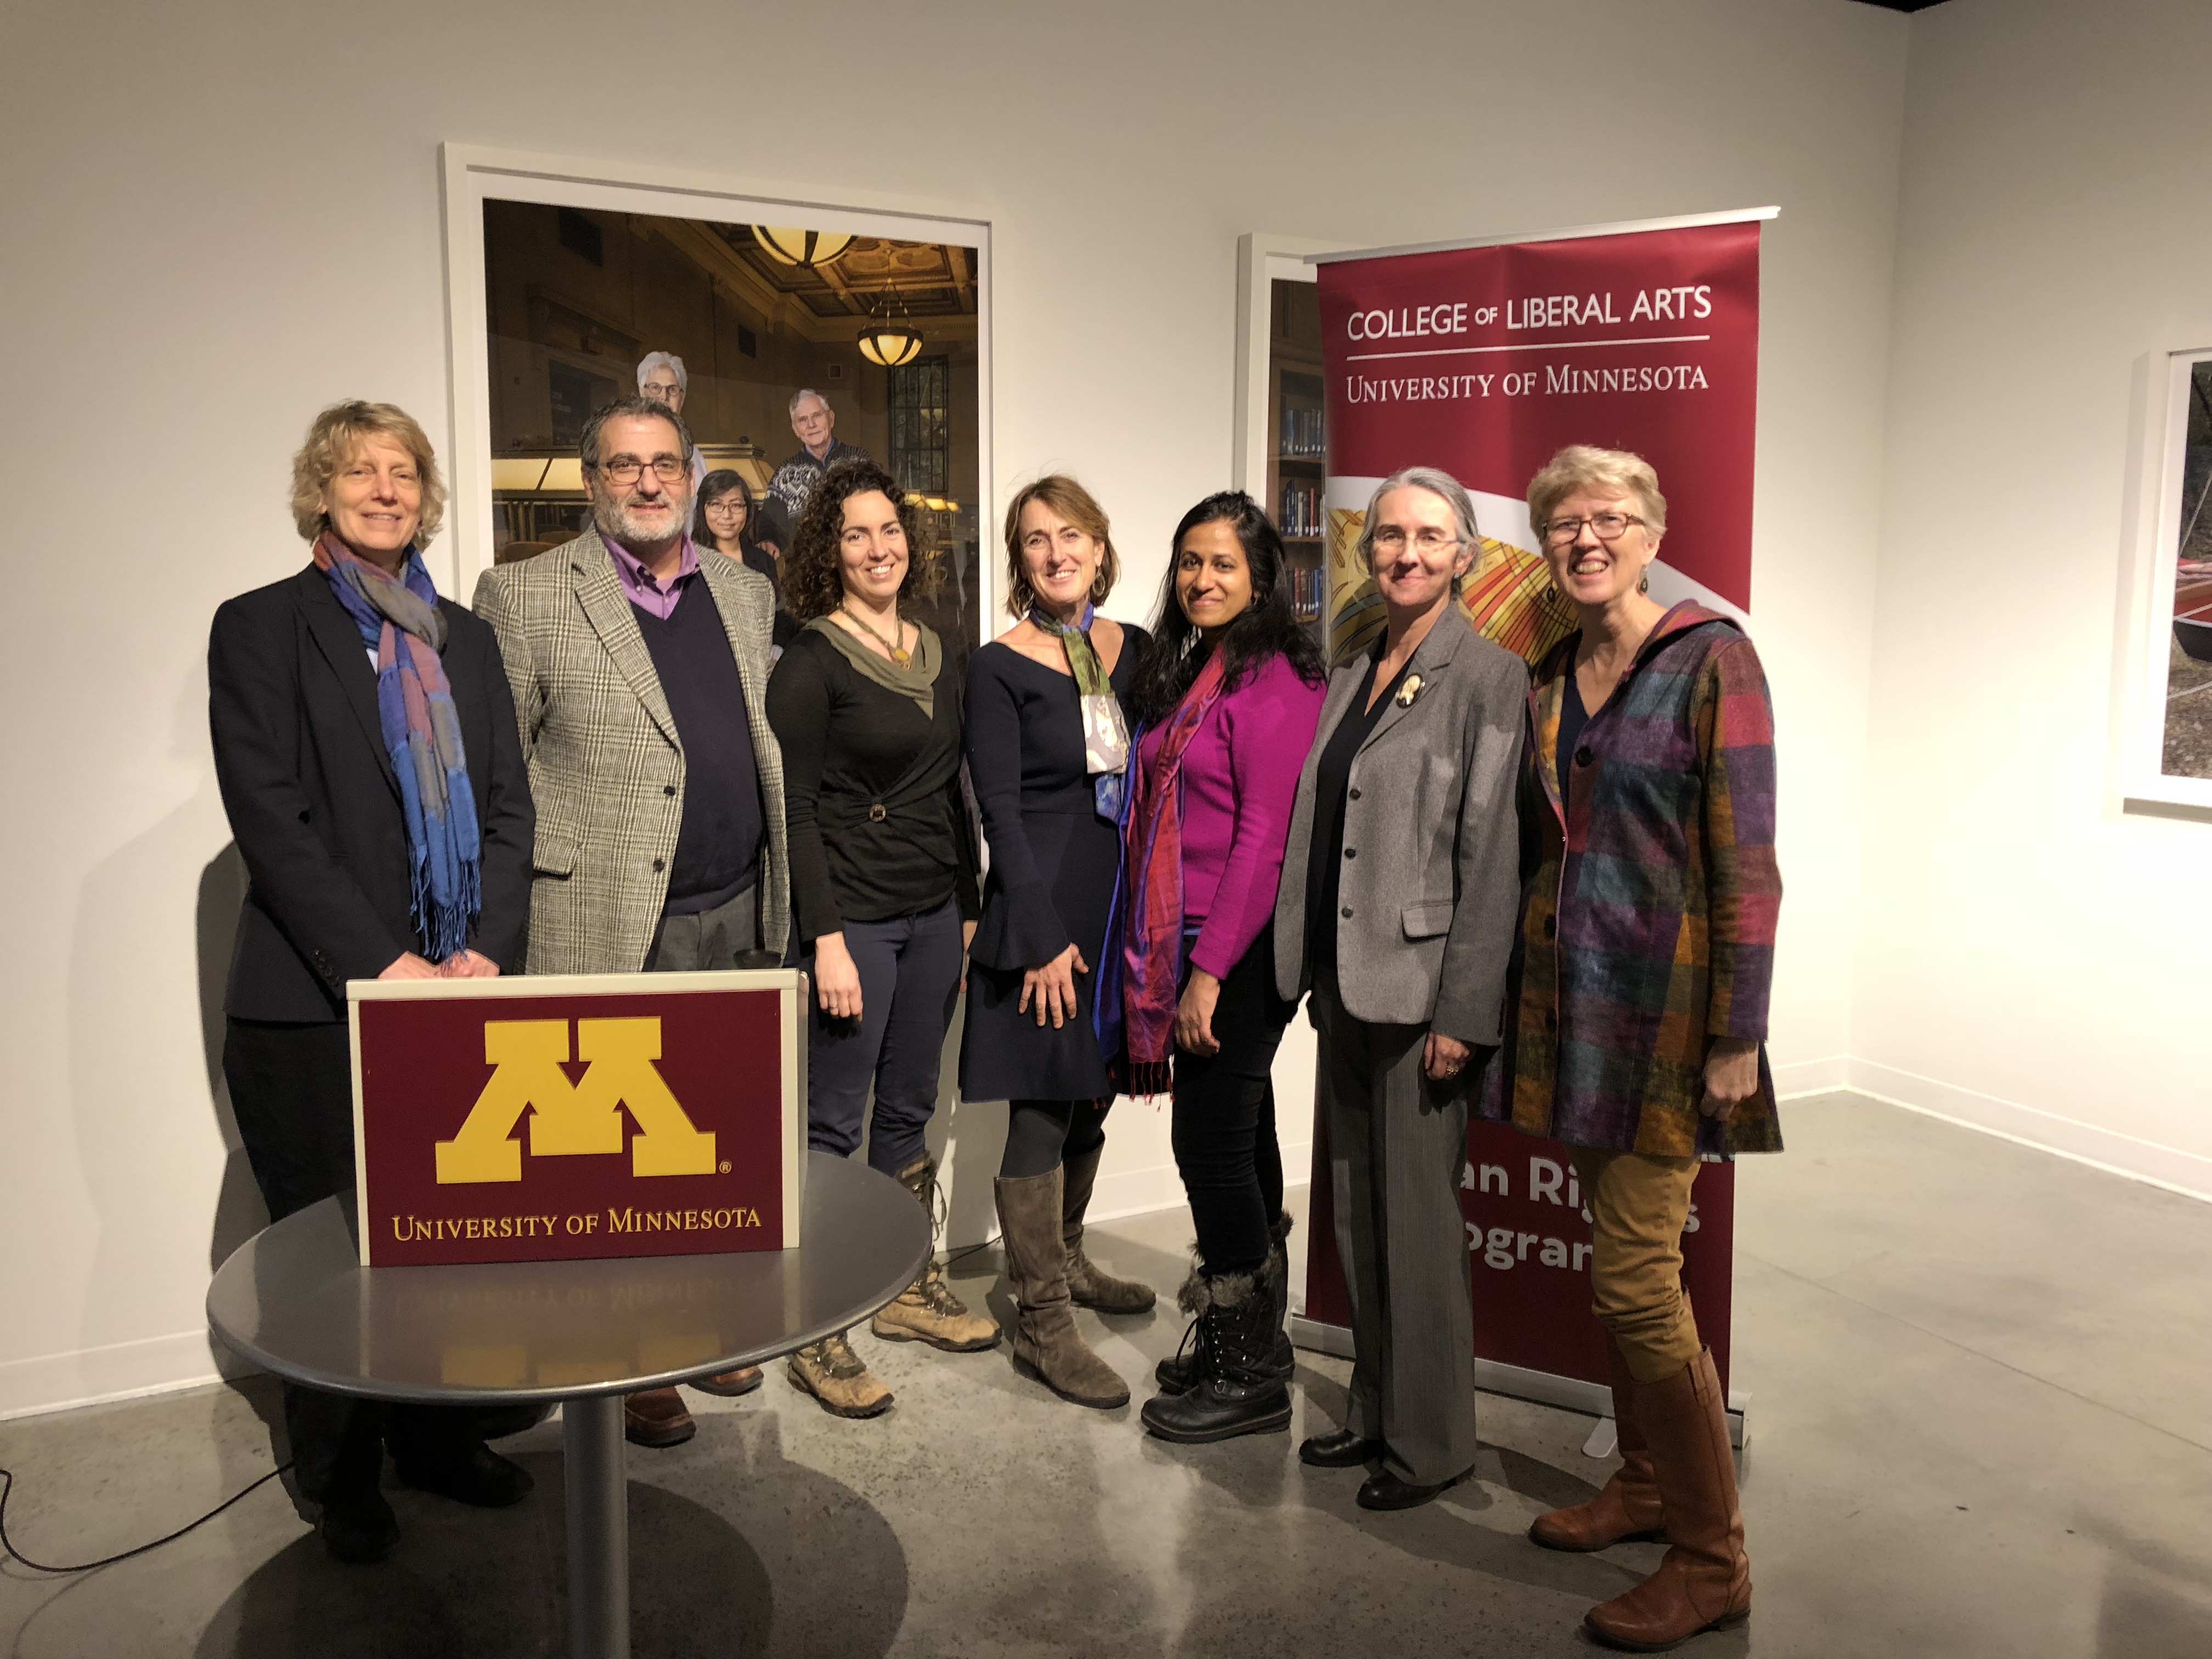 A group of seven adults stand in a line in front of a sign reading "College of Liberal Arts." There are 6 women and one man, and a podium reading "University of Minnesota" is placed on a table in the foreground.